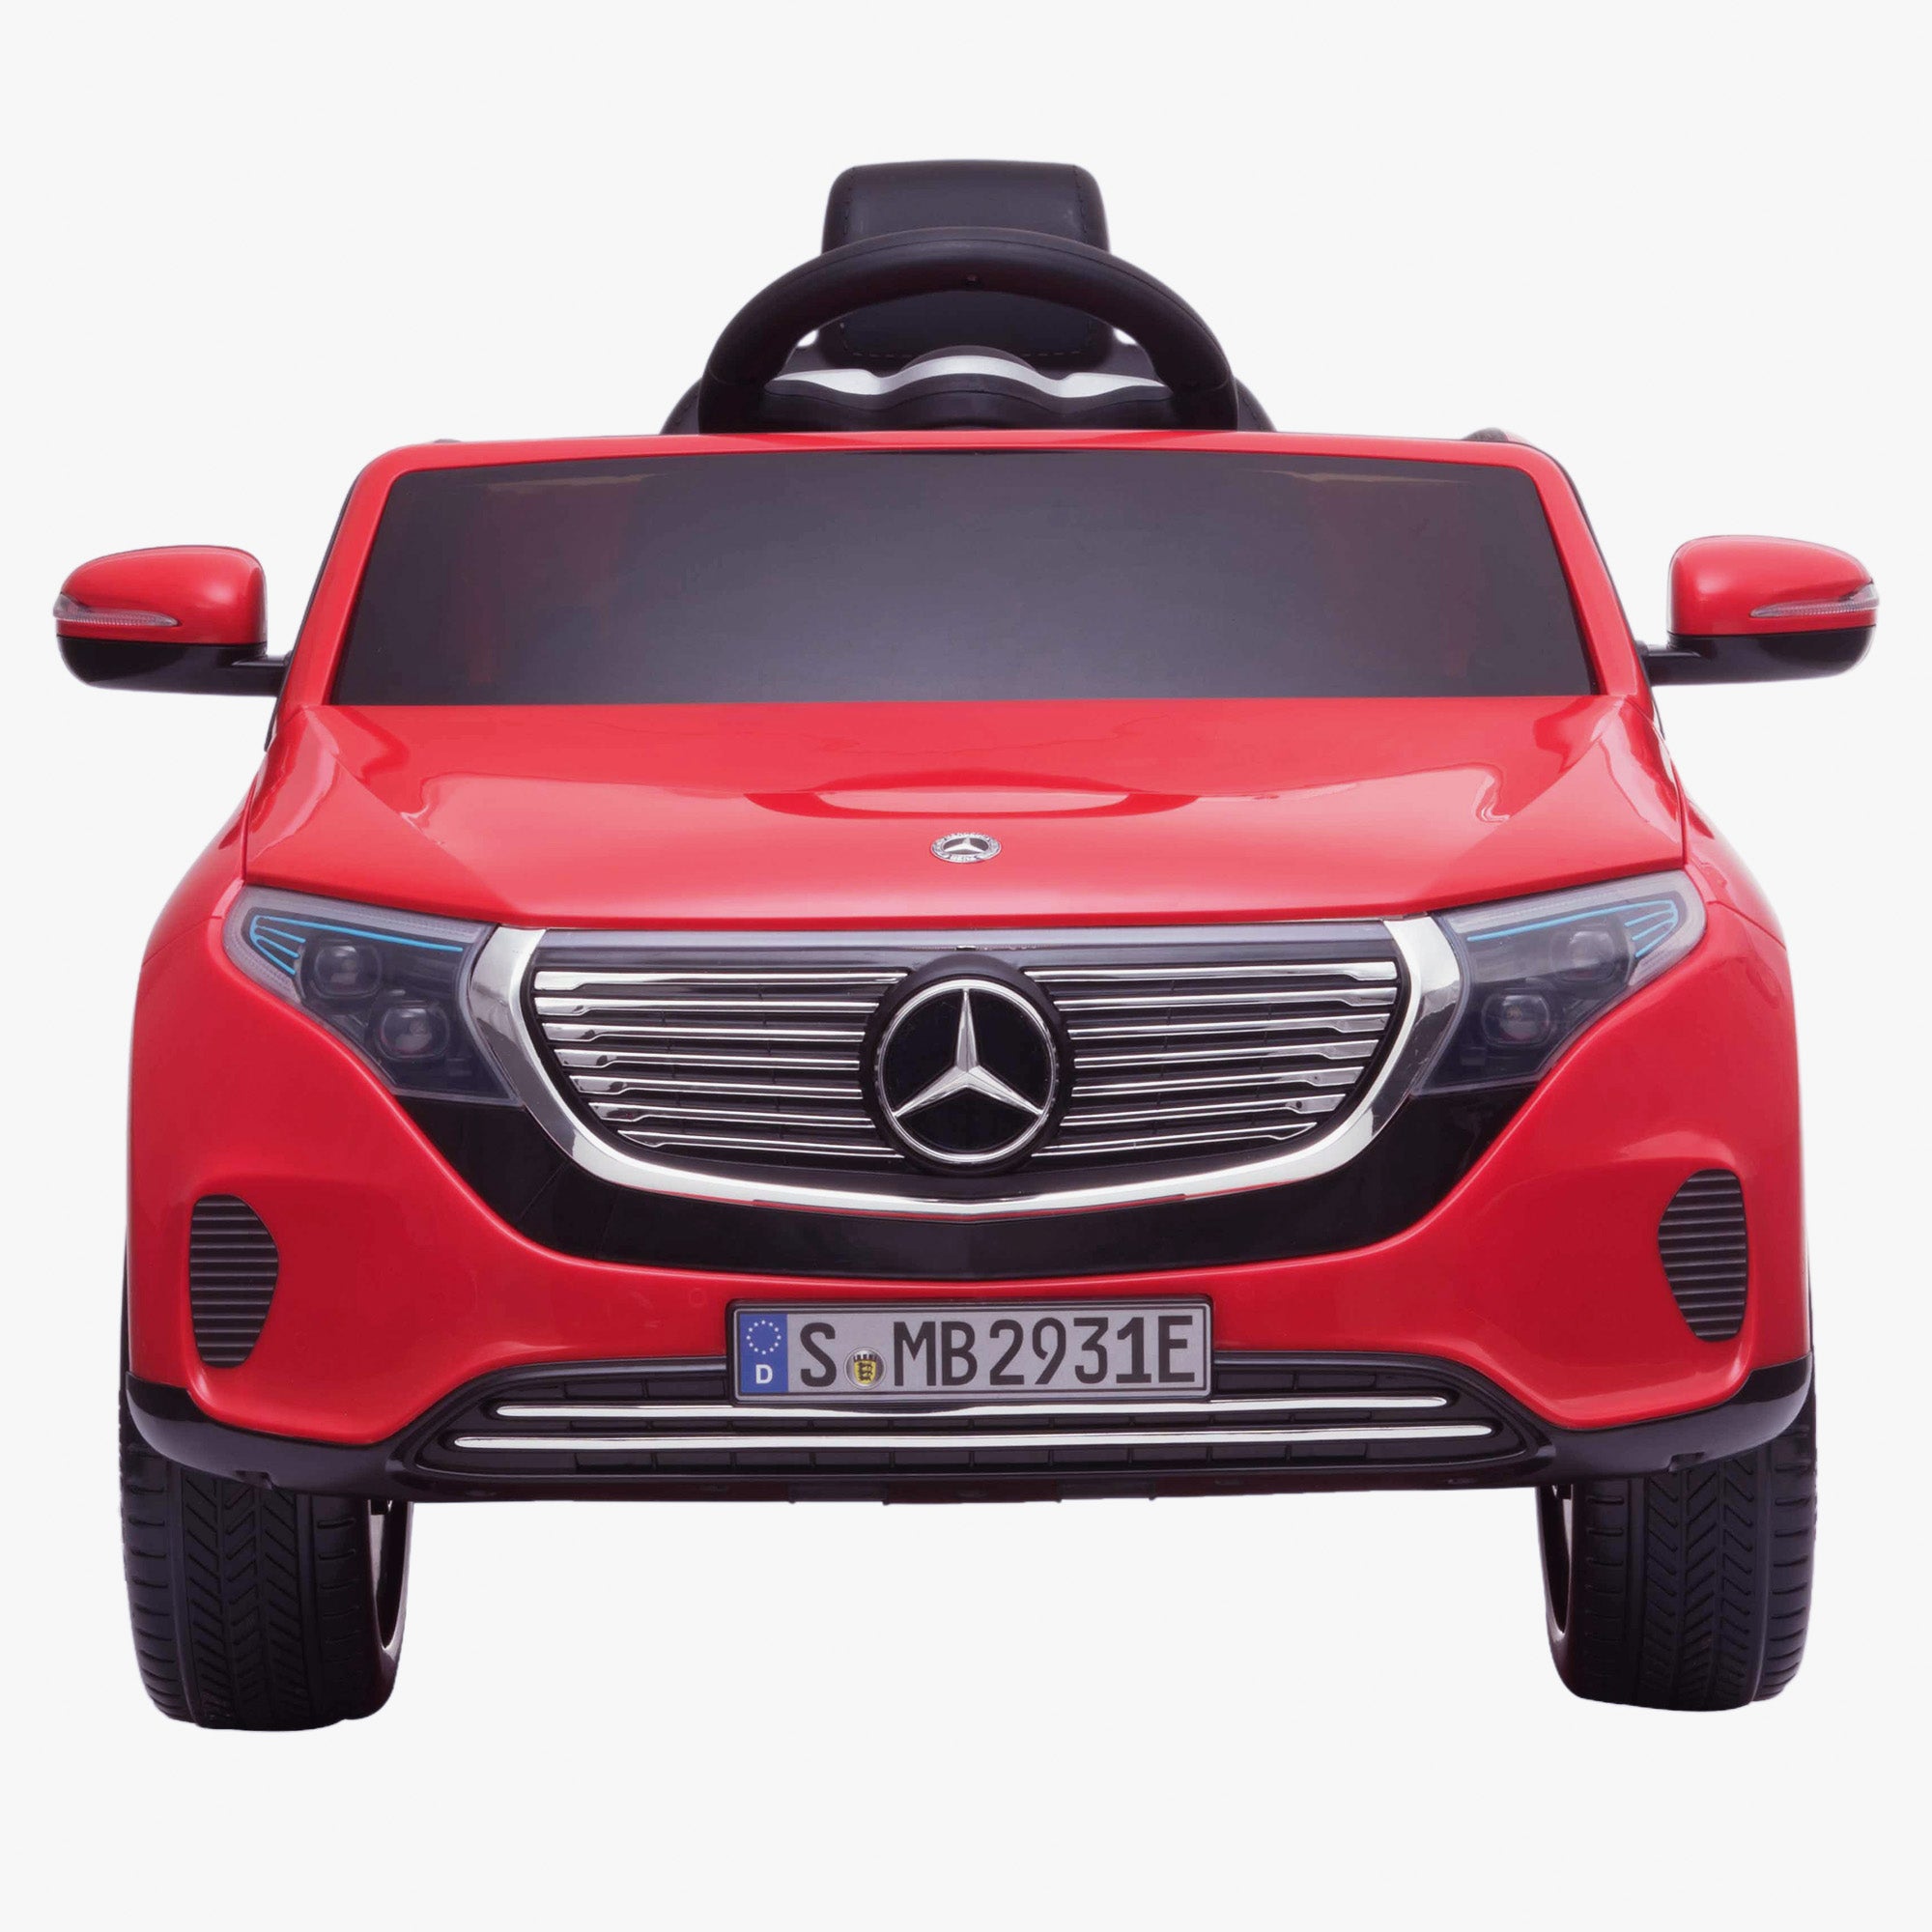 Kids-Licensed-Mercedes-EQC-4Matic-Electric-Ride-On-Car-12V-with-Parental-Remote-Control-Main-Red-1.jpg